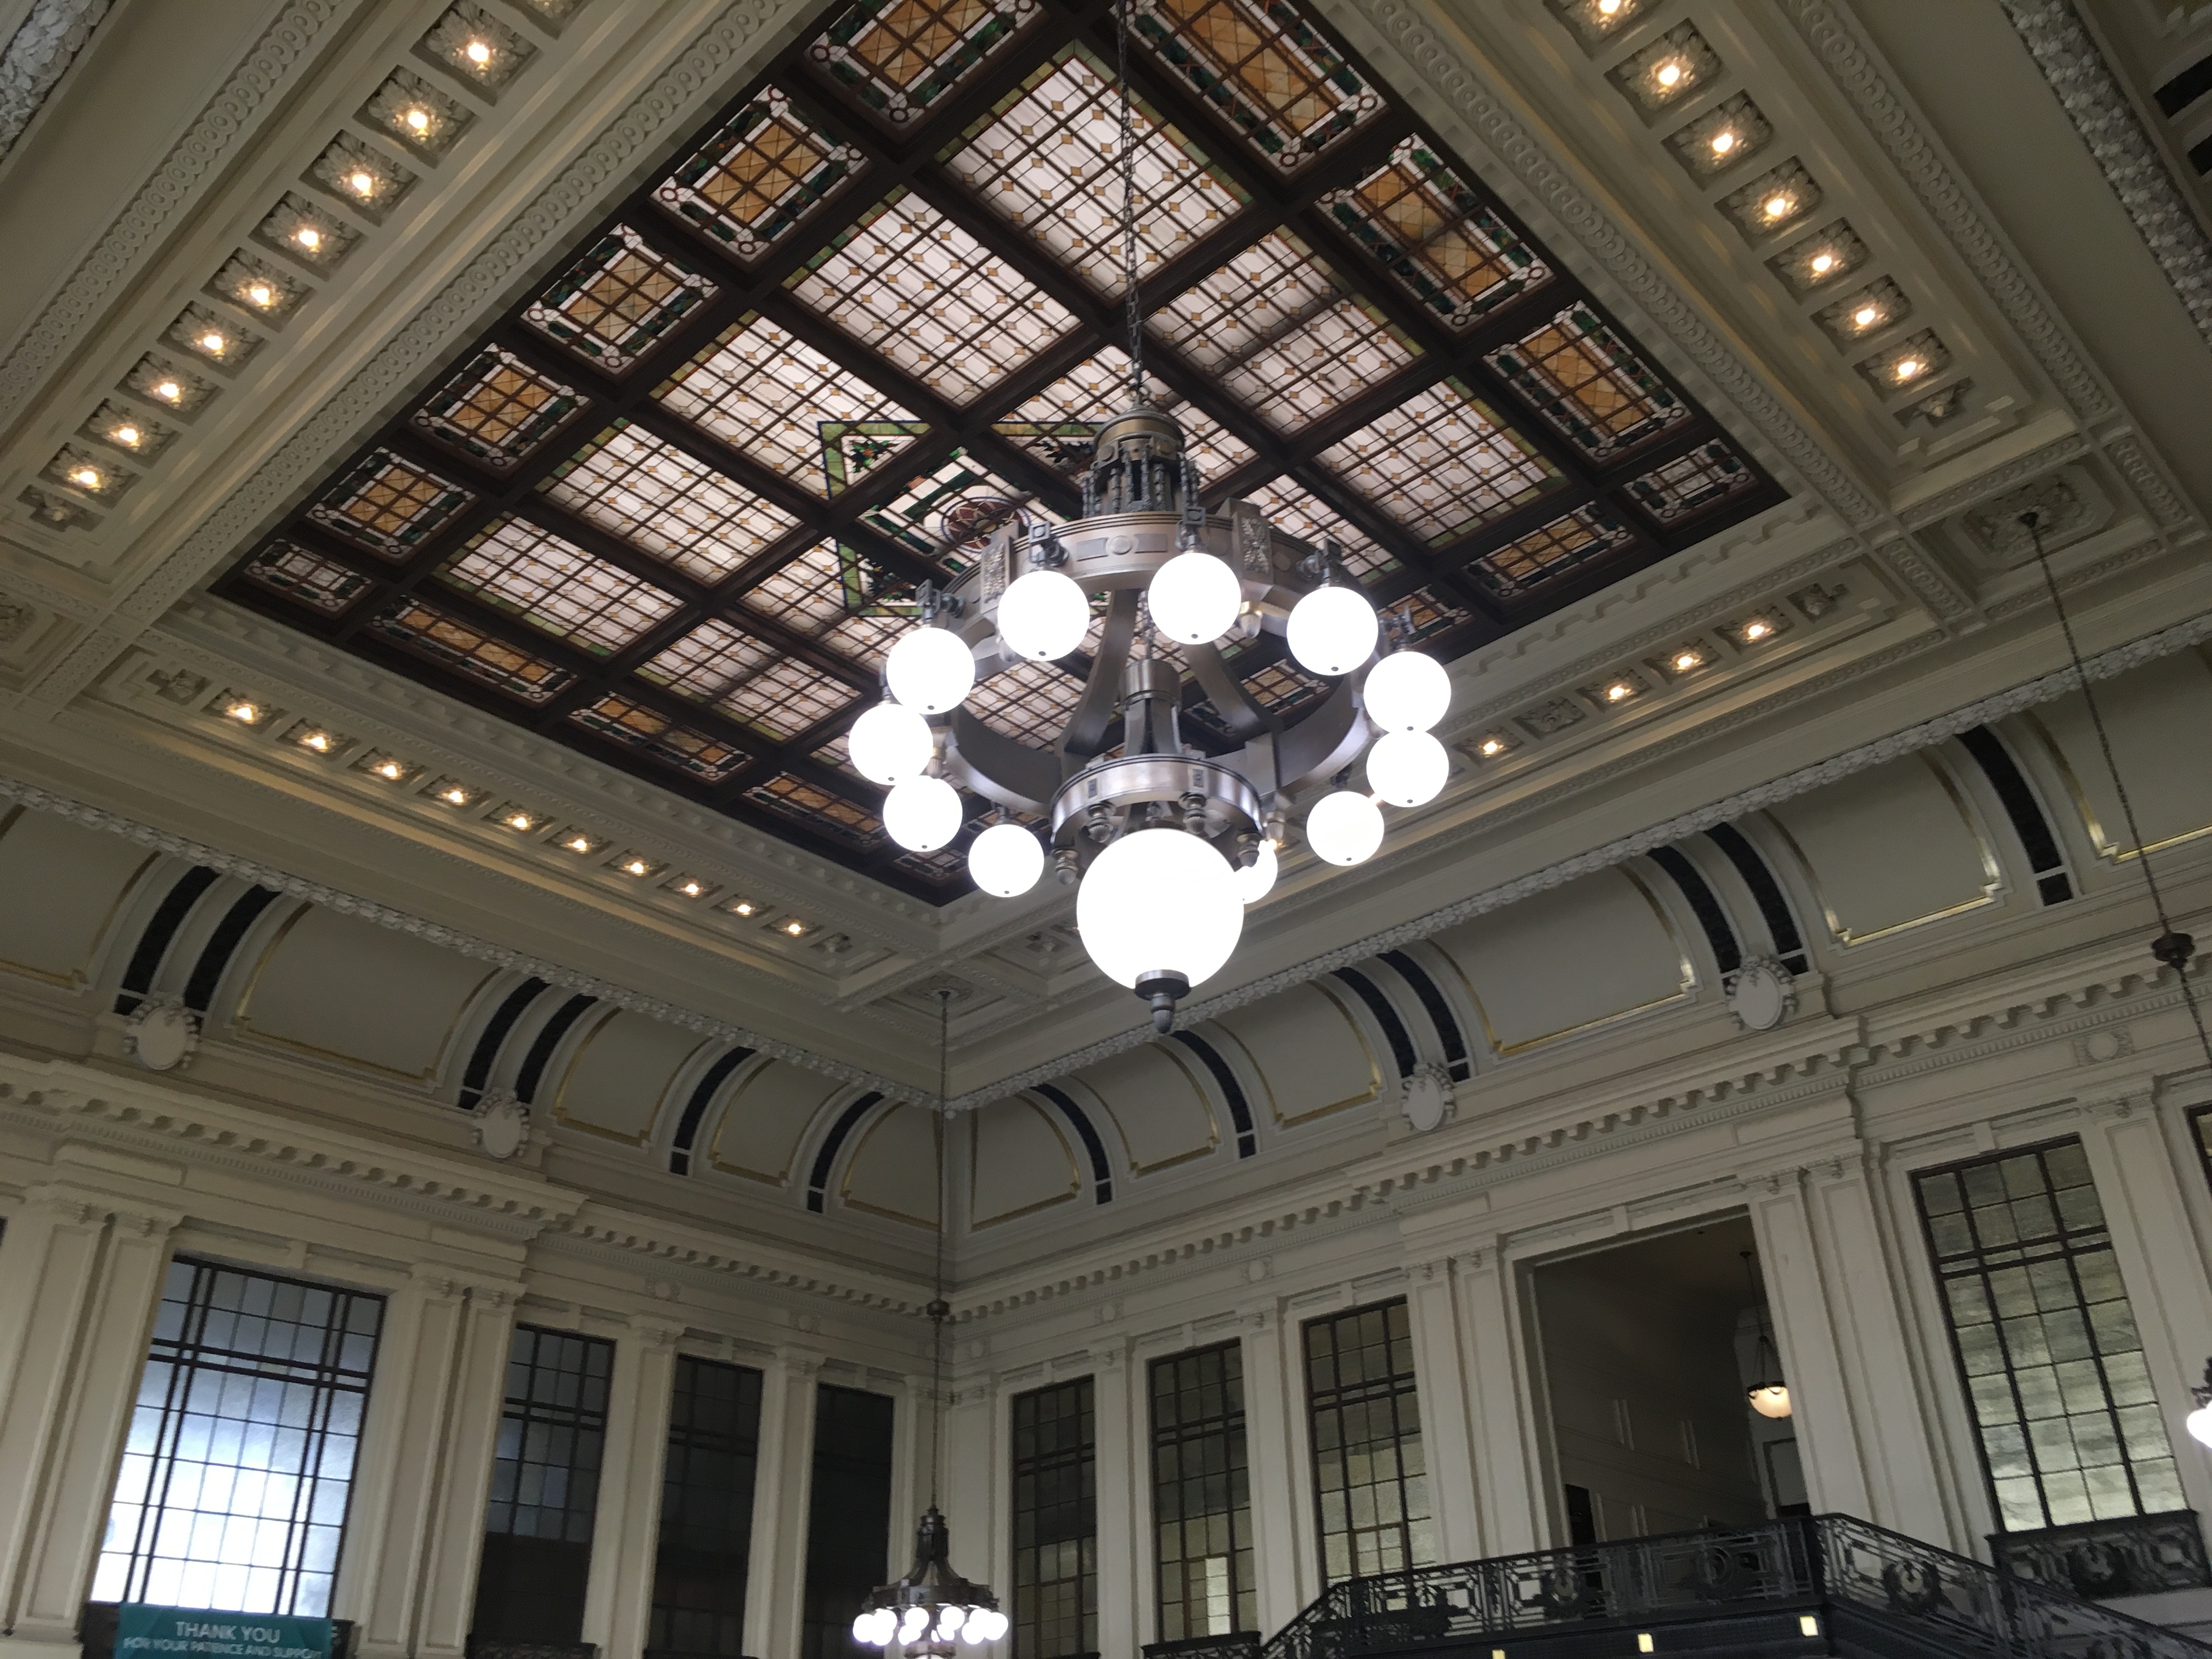 Photo of a pretty train station ceiling